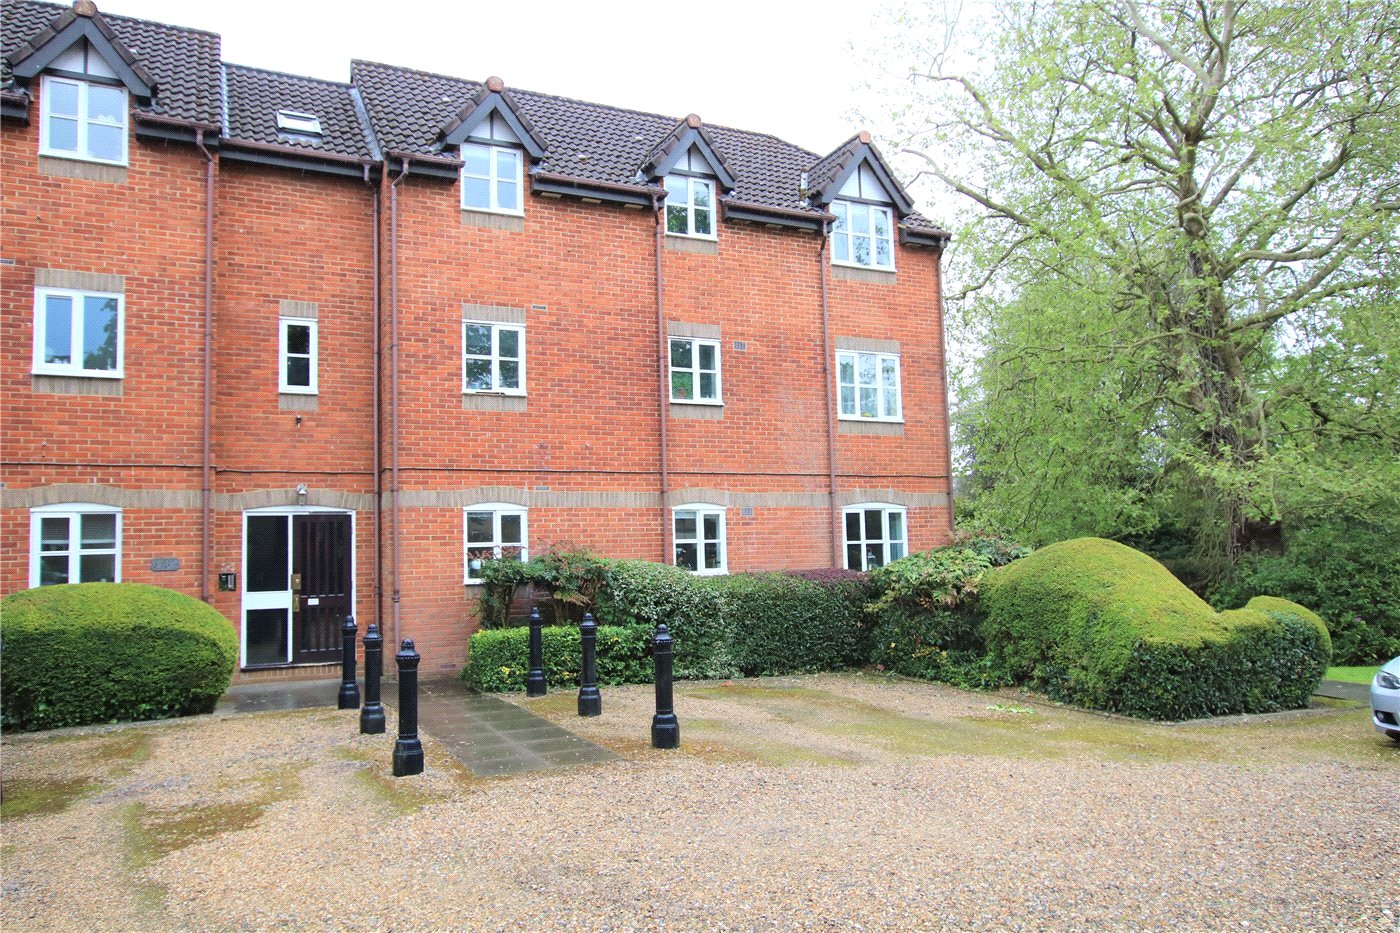 Ashdown House, Rembrandt Way, Reading, RG1 2 bedroom flat/apartment in Rembrandt Way